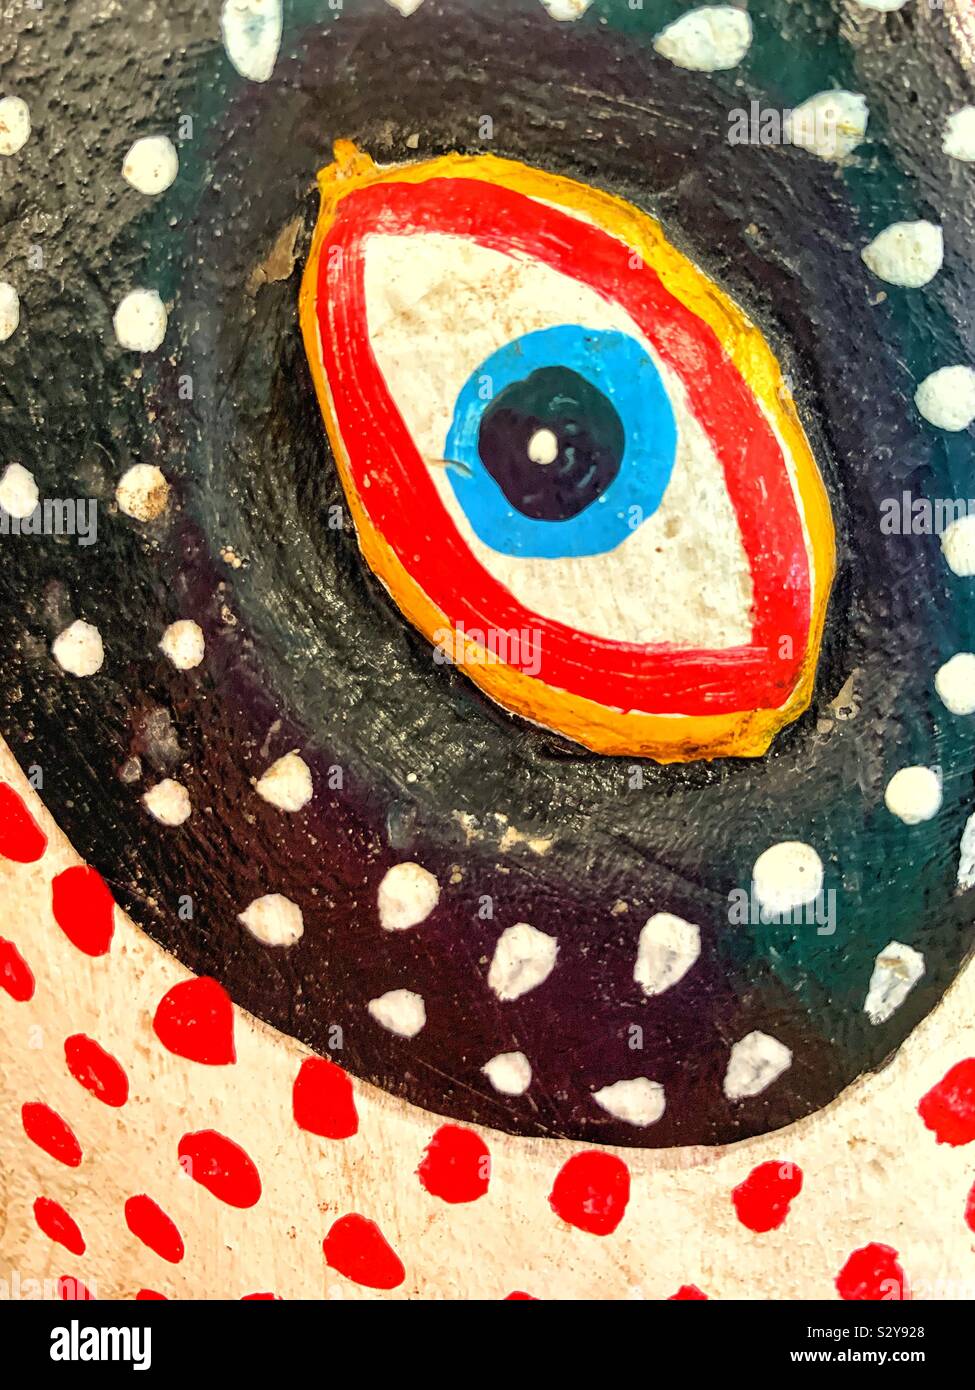 Big crafty painted all seeing eye Stock Photo